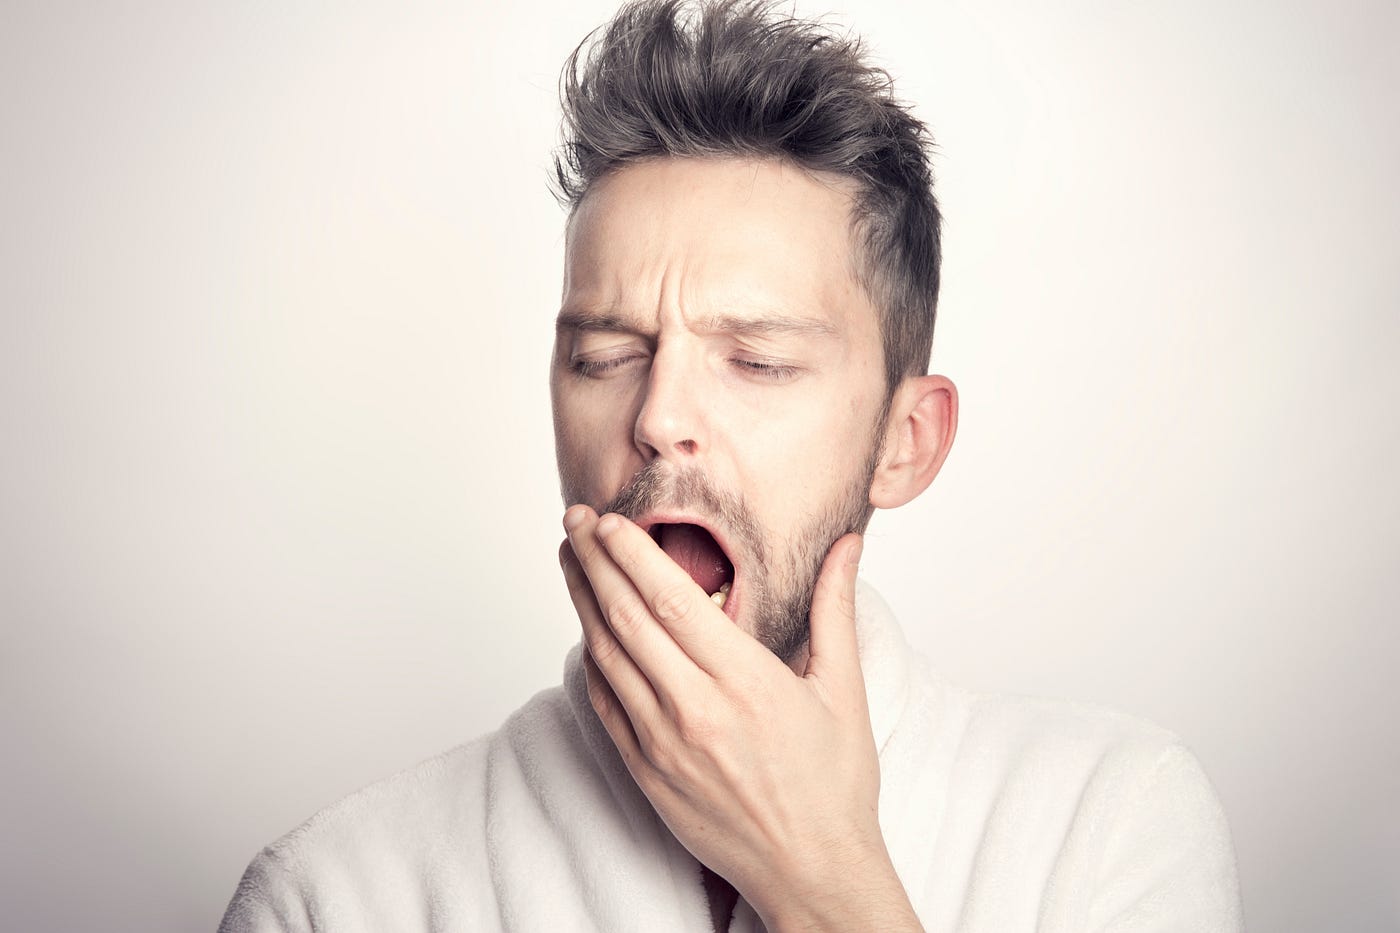 Young white male faces us, eyes closed as he yawns. He puts his left hand up to his mouth. White sweater, white background.